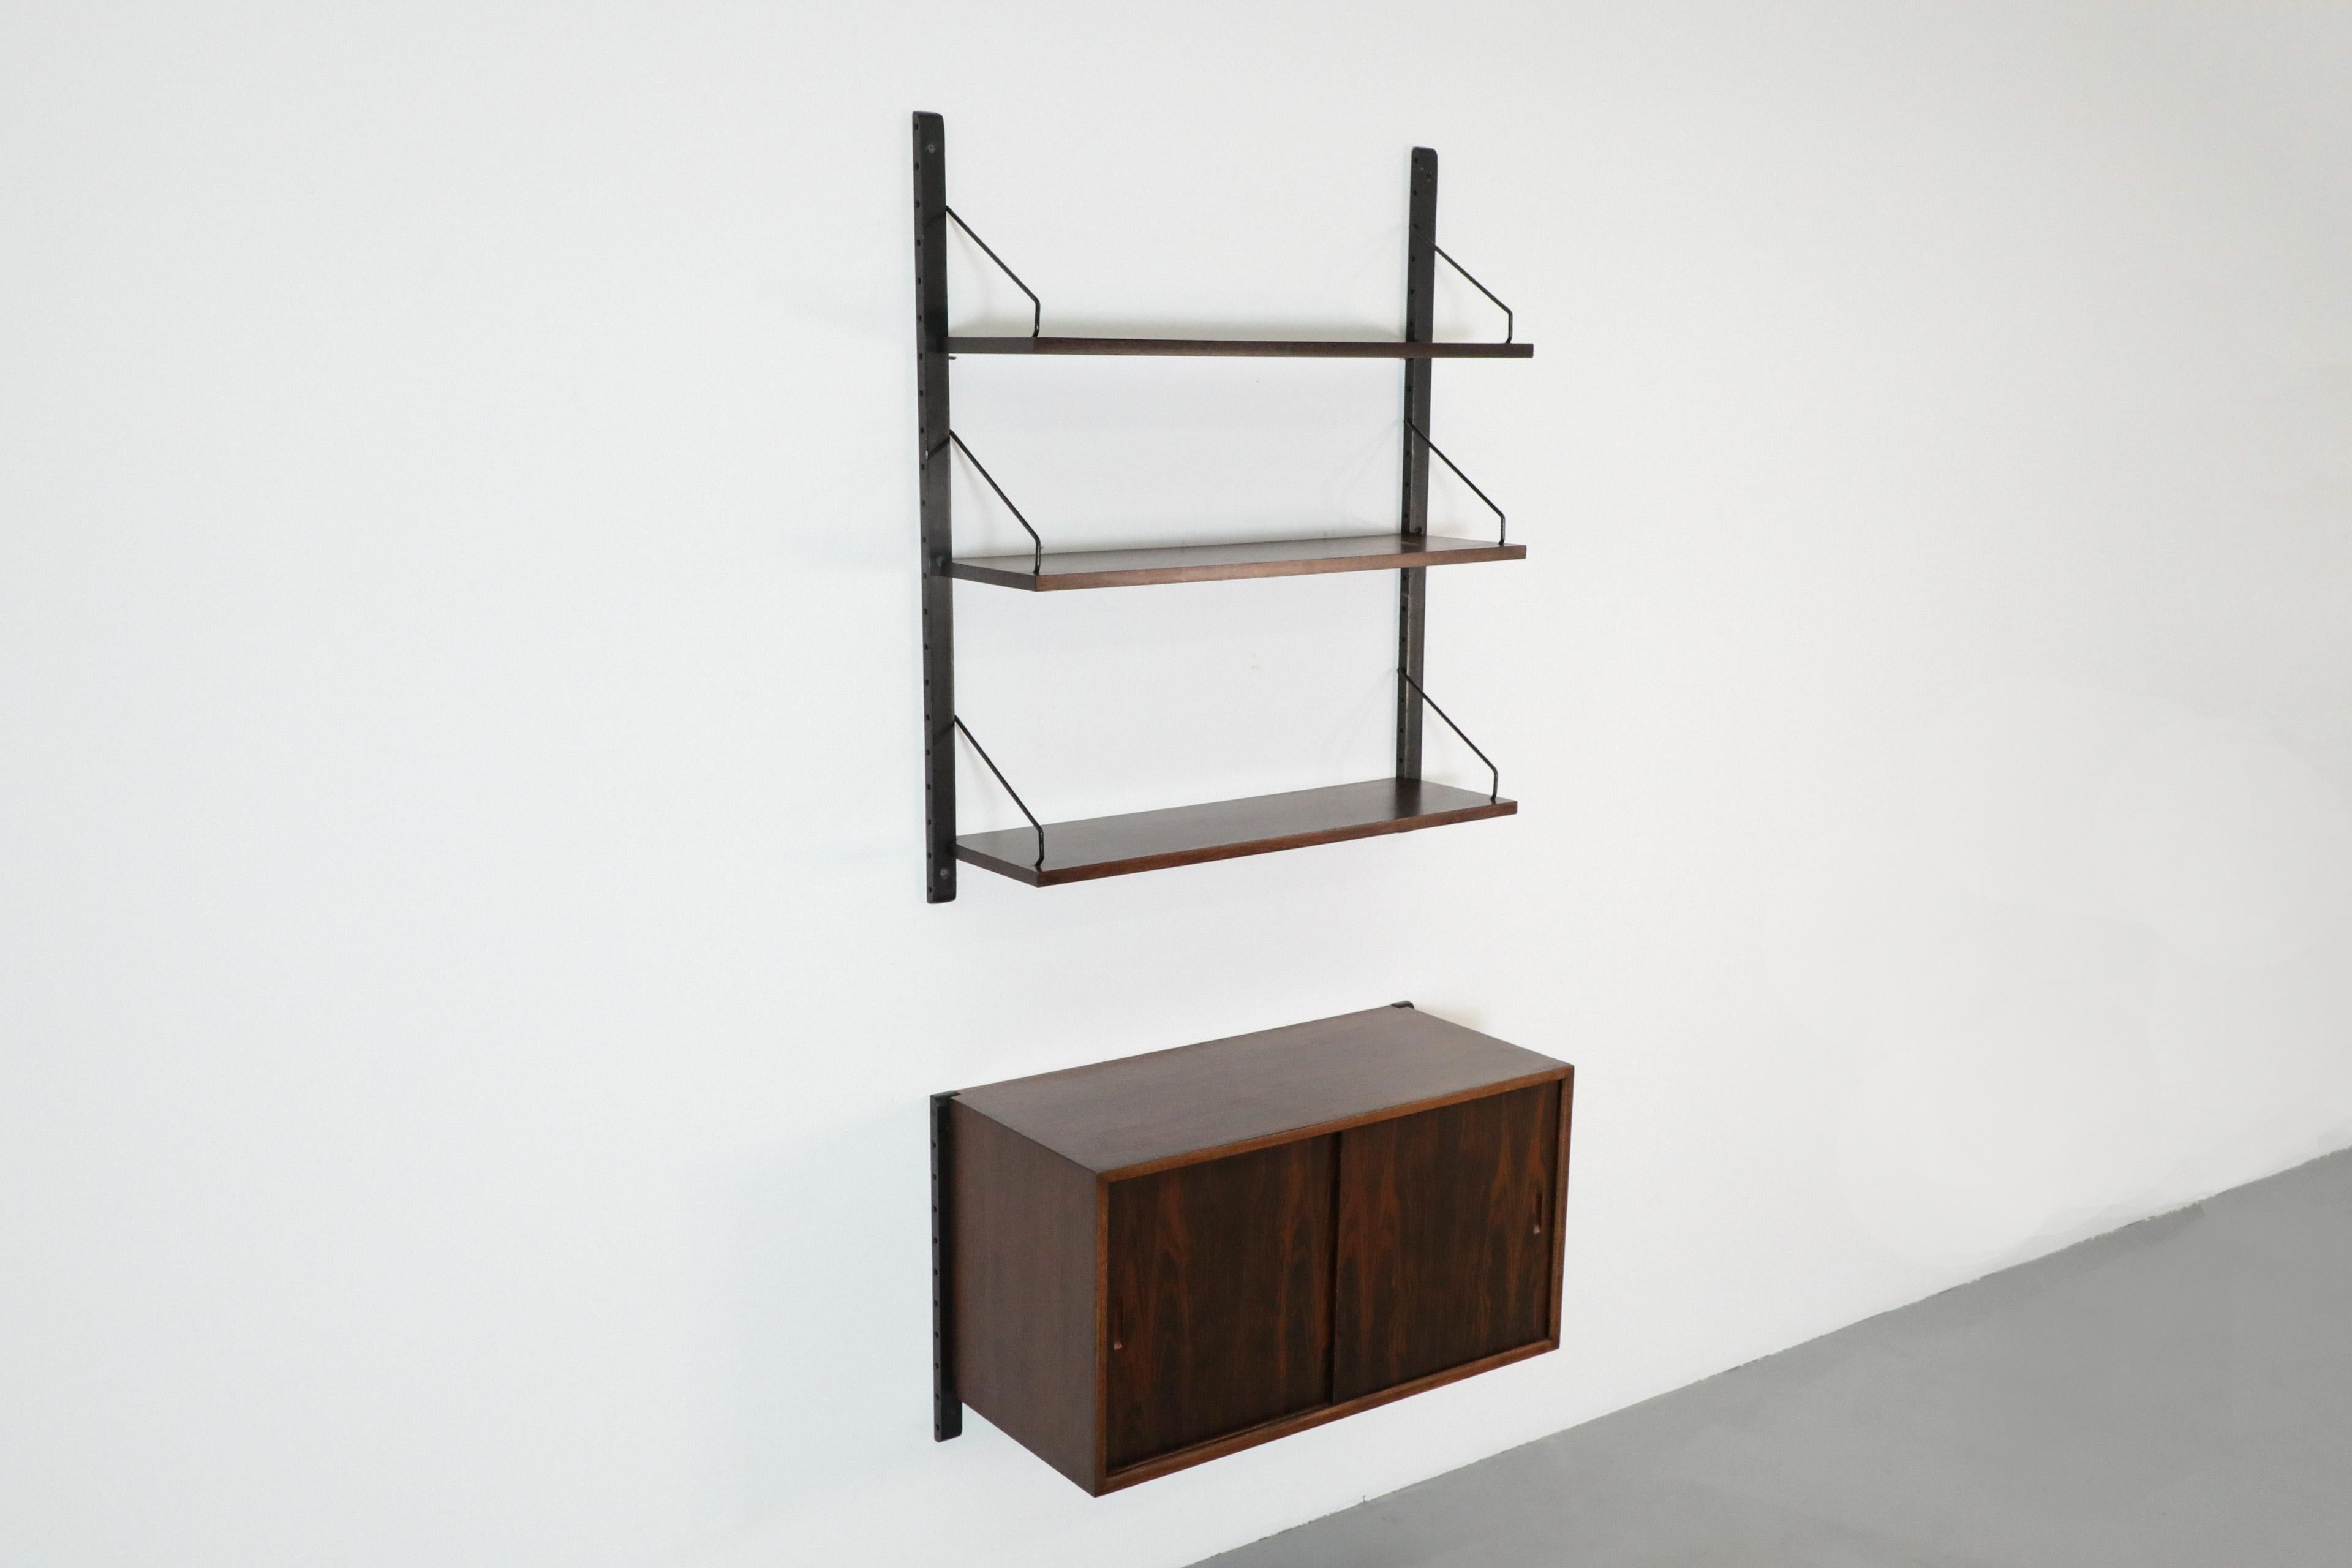 Poul Cadovius Royal Shelving Rosewood wall mount shelving unit and cabinet. The top shelves have black wood risers with rosewood shelves, the cabinet can be mounted above or below, has sliding doors and a cutout in the back for cords. Total